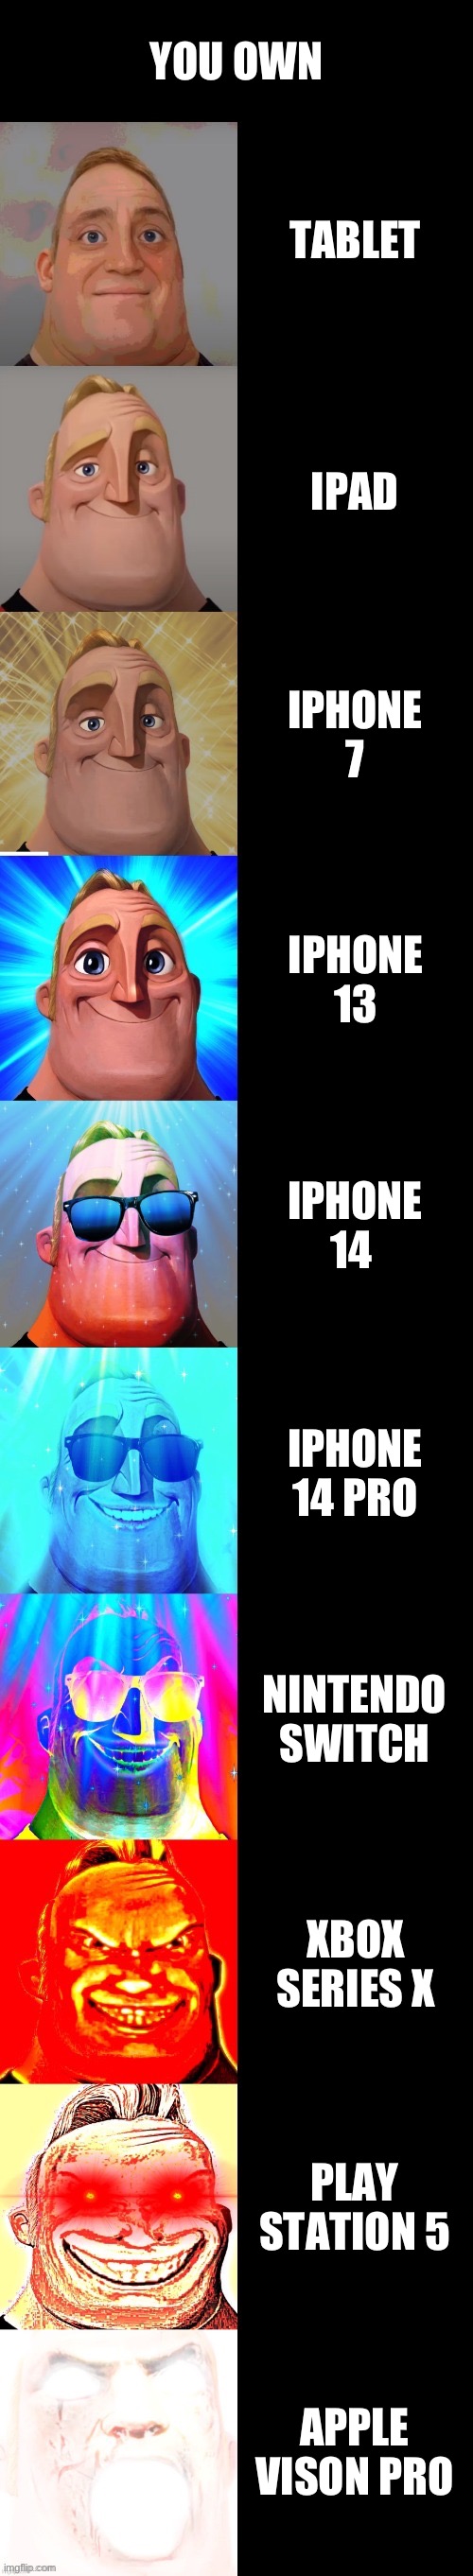 mr incredible becoming canny | YOU OWN; TABLET; IPAD; IPHONE 7; IPHONE 13; IPHONE 14; IPHONE 14 PRO; NINTENDO SWITCH; XBOX SERIES X; PLAY STATION 5; APPLE VISON PRO | image tagged in mr incredible becoming canny,iphone,apple vison pro,ps5,xbox | made w/ Imgflip meme maker